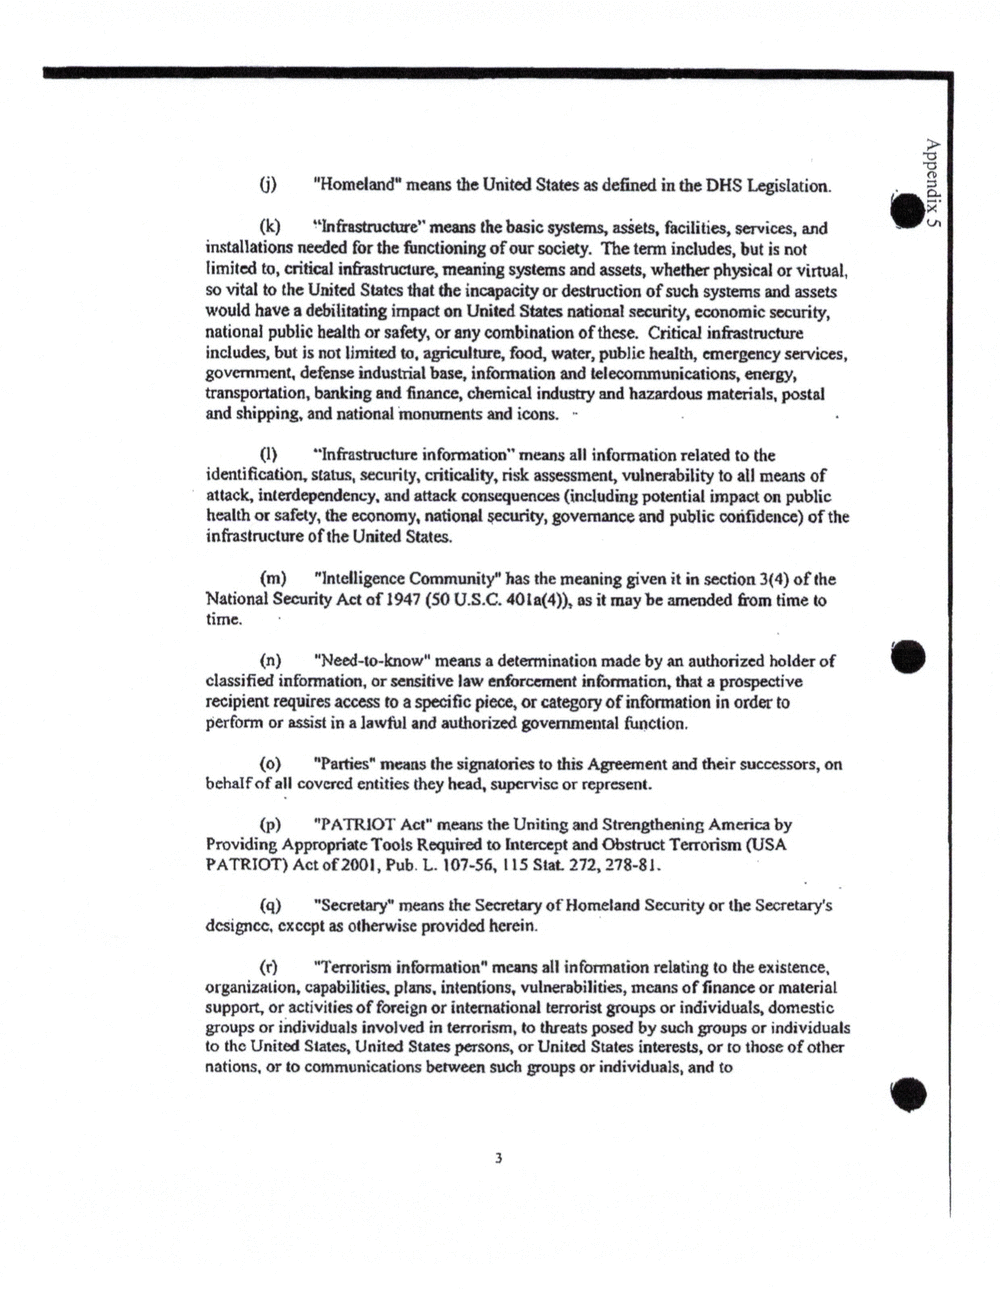 Page 109 from March 2013 Watchlisting Guidance